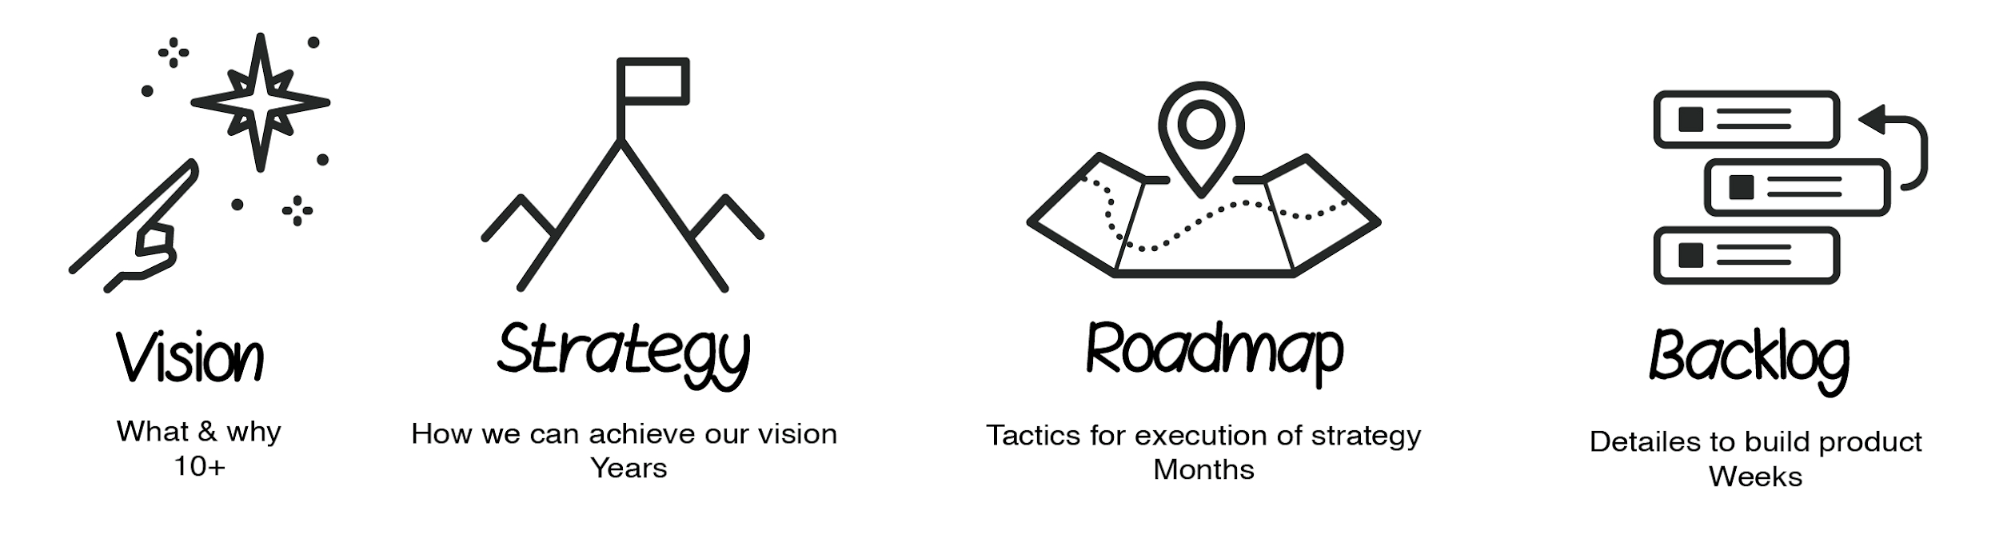 Outline of the outcome-based roadmap building process: vision, strategy, roadmap, backlog